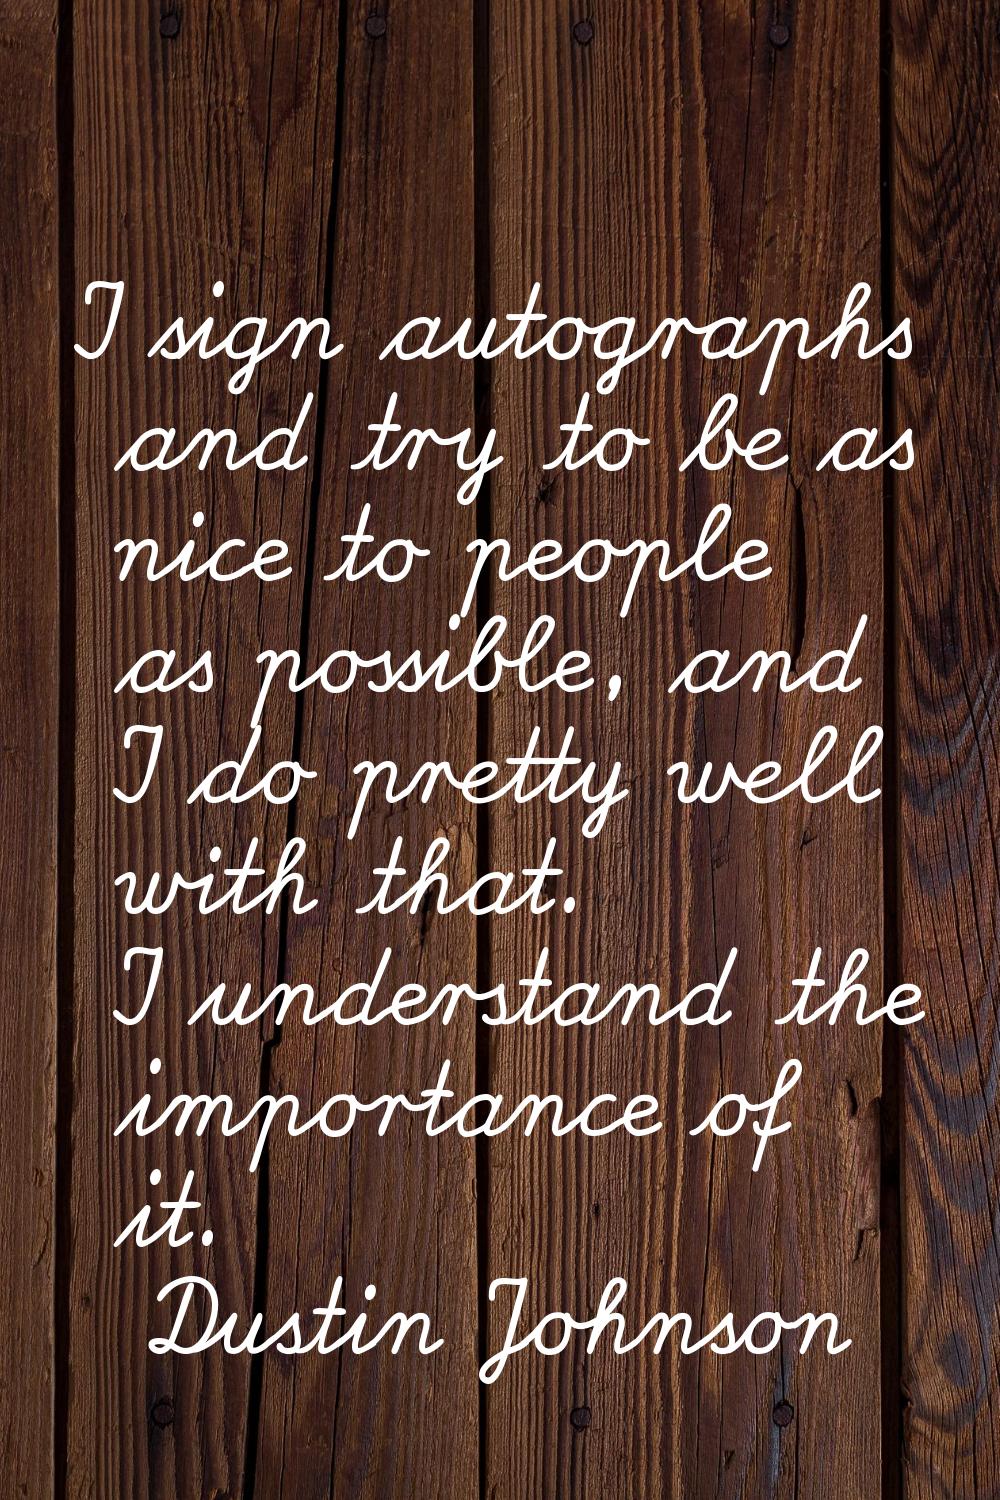 I sign autographs and try to be as nice to people as possible, and I do pretty well with that. I un